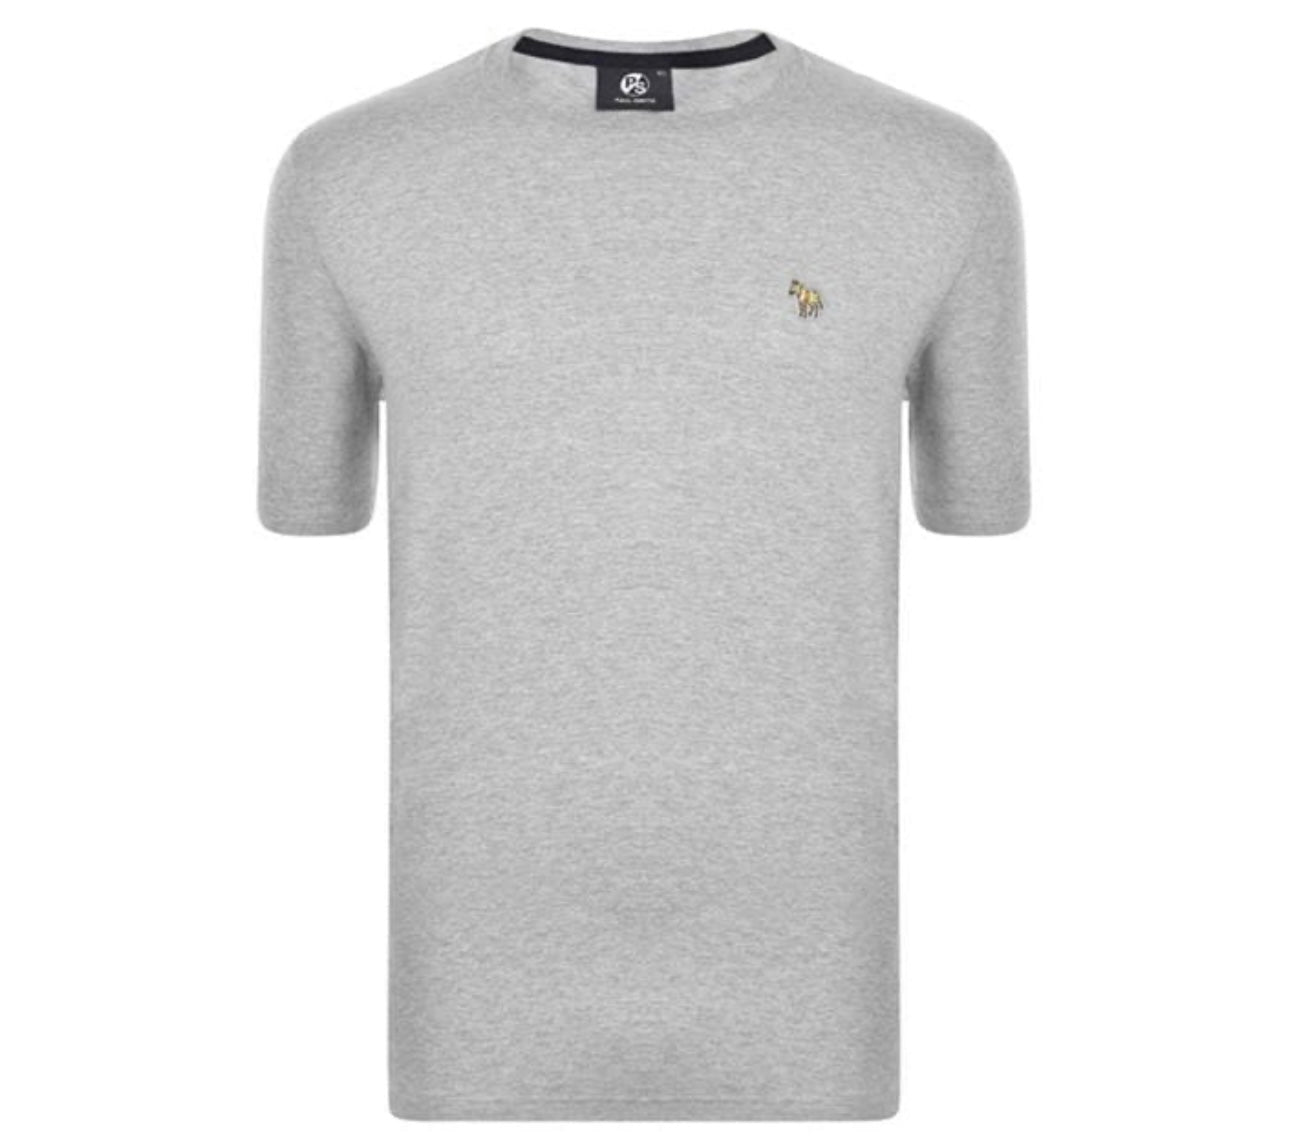 PAUL SMITH EMBROIDERED ZEBRA T-SHIRT GREY